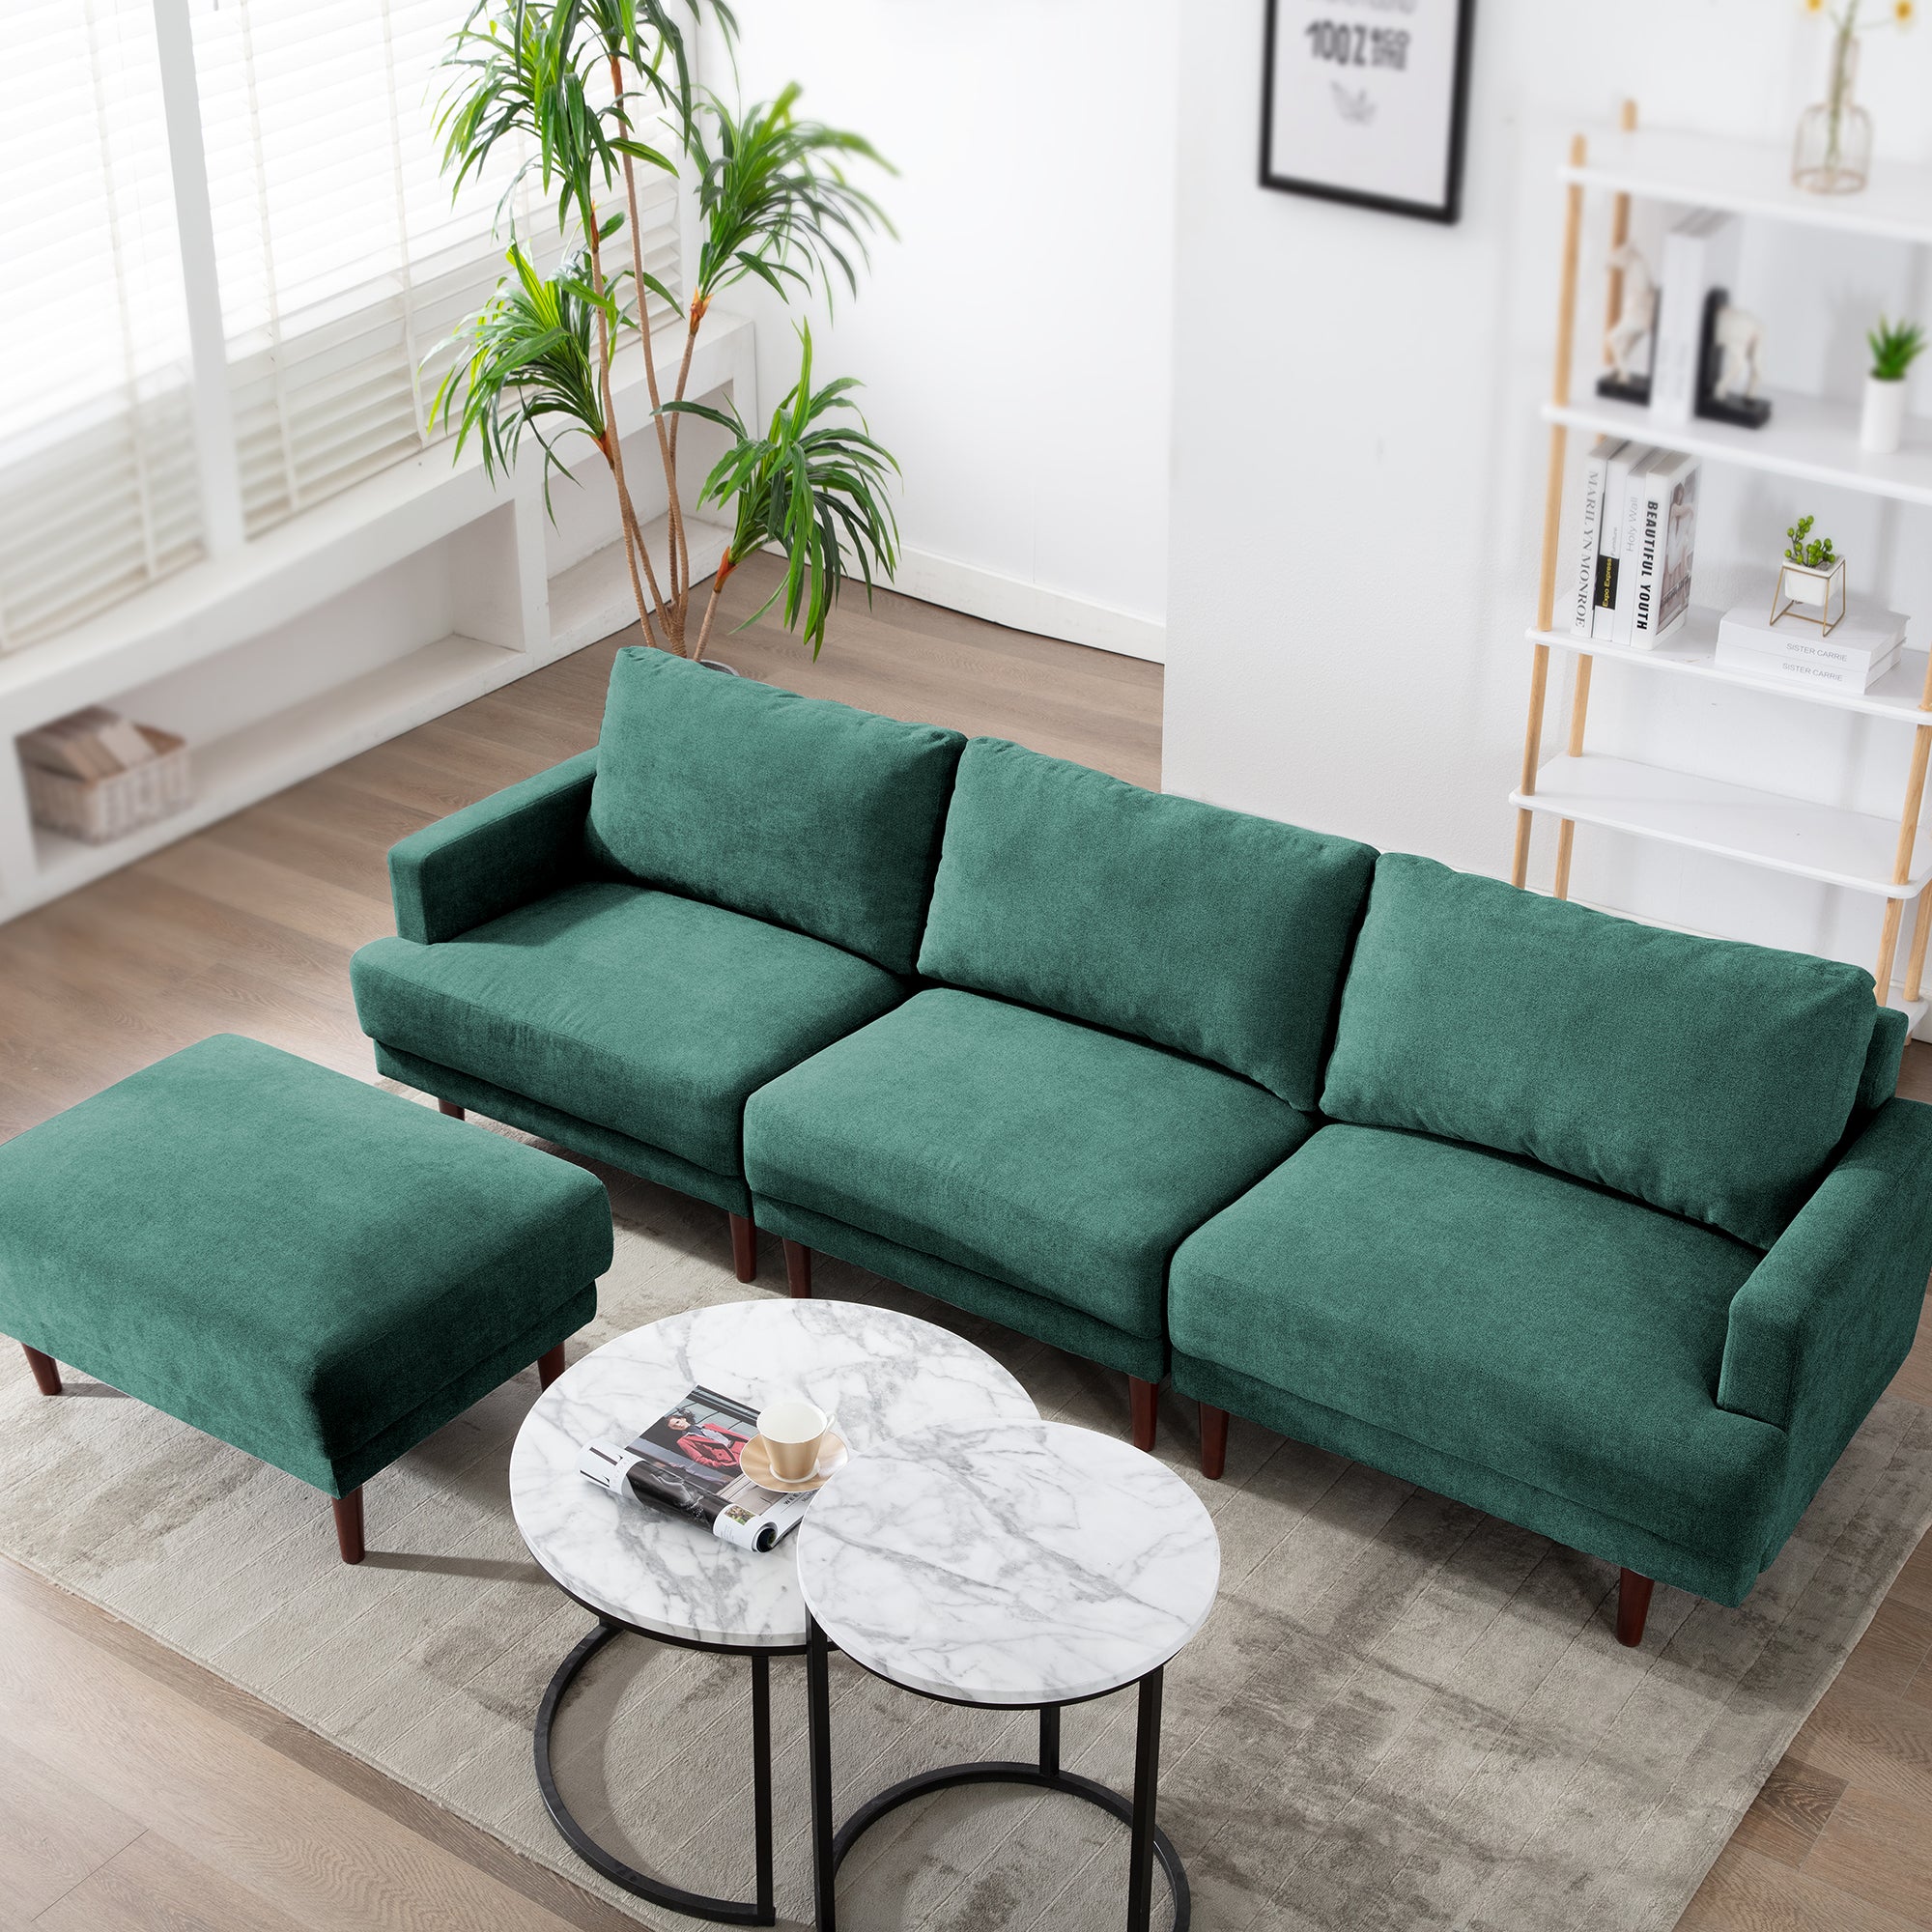 MCombo Sectional Couch Sofa 3-Seat Small Upholstered Modern Sofa with Ottoman Convertible Modular Couch Set for Bedroom Living Room L Shaped Couch Loveseat